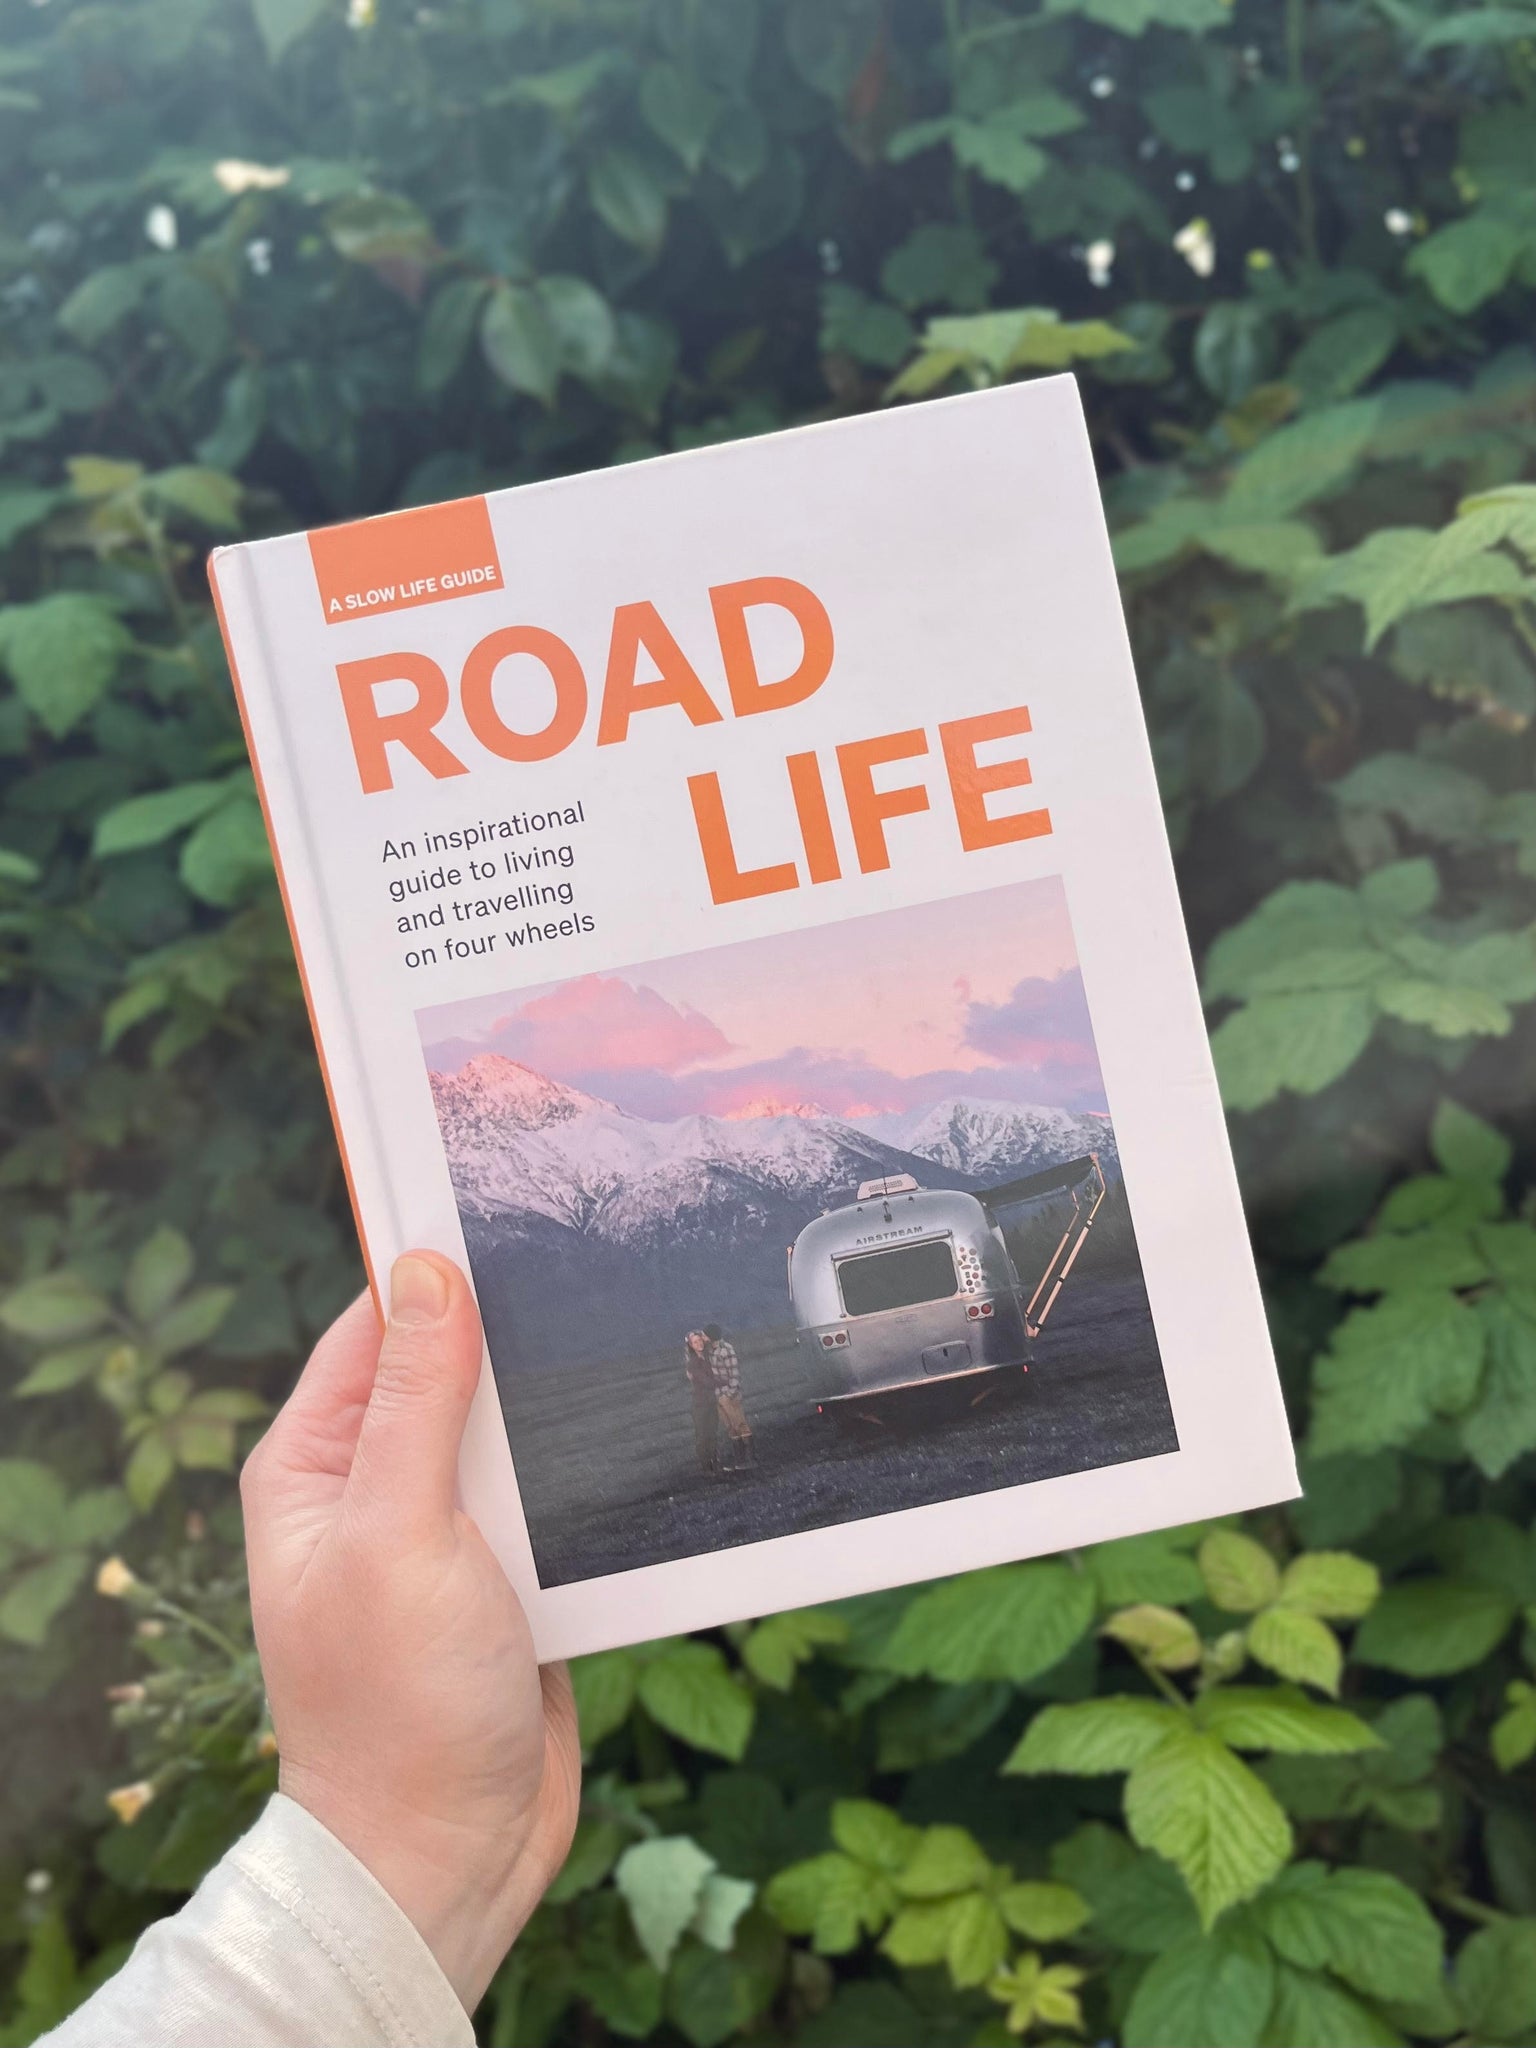 Road Life: A Slow Life Guide